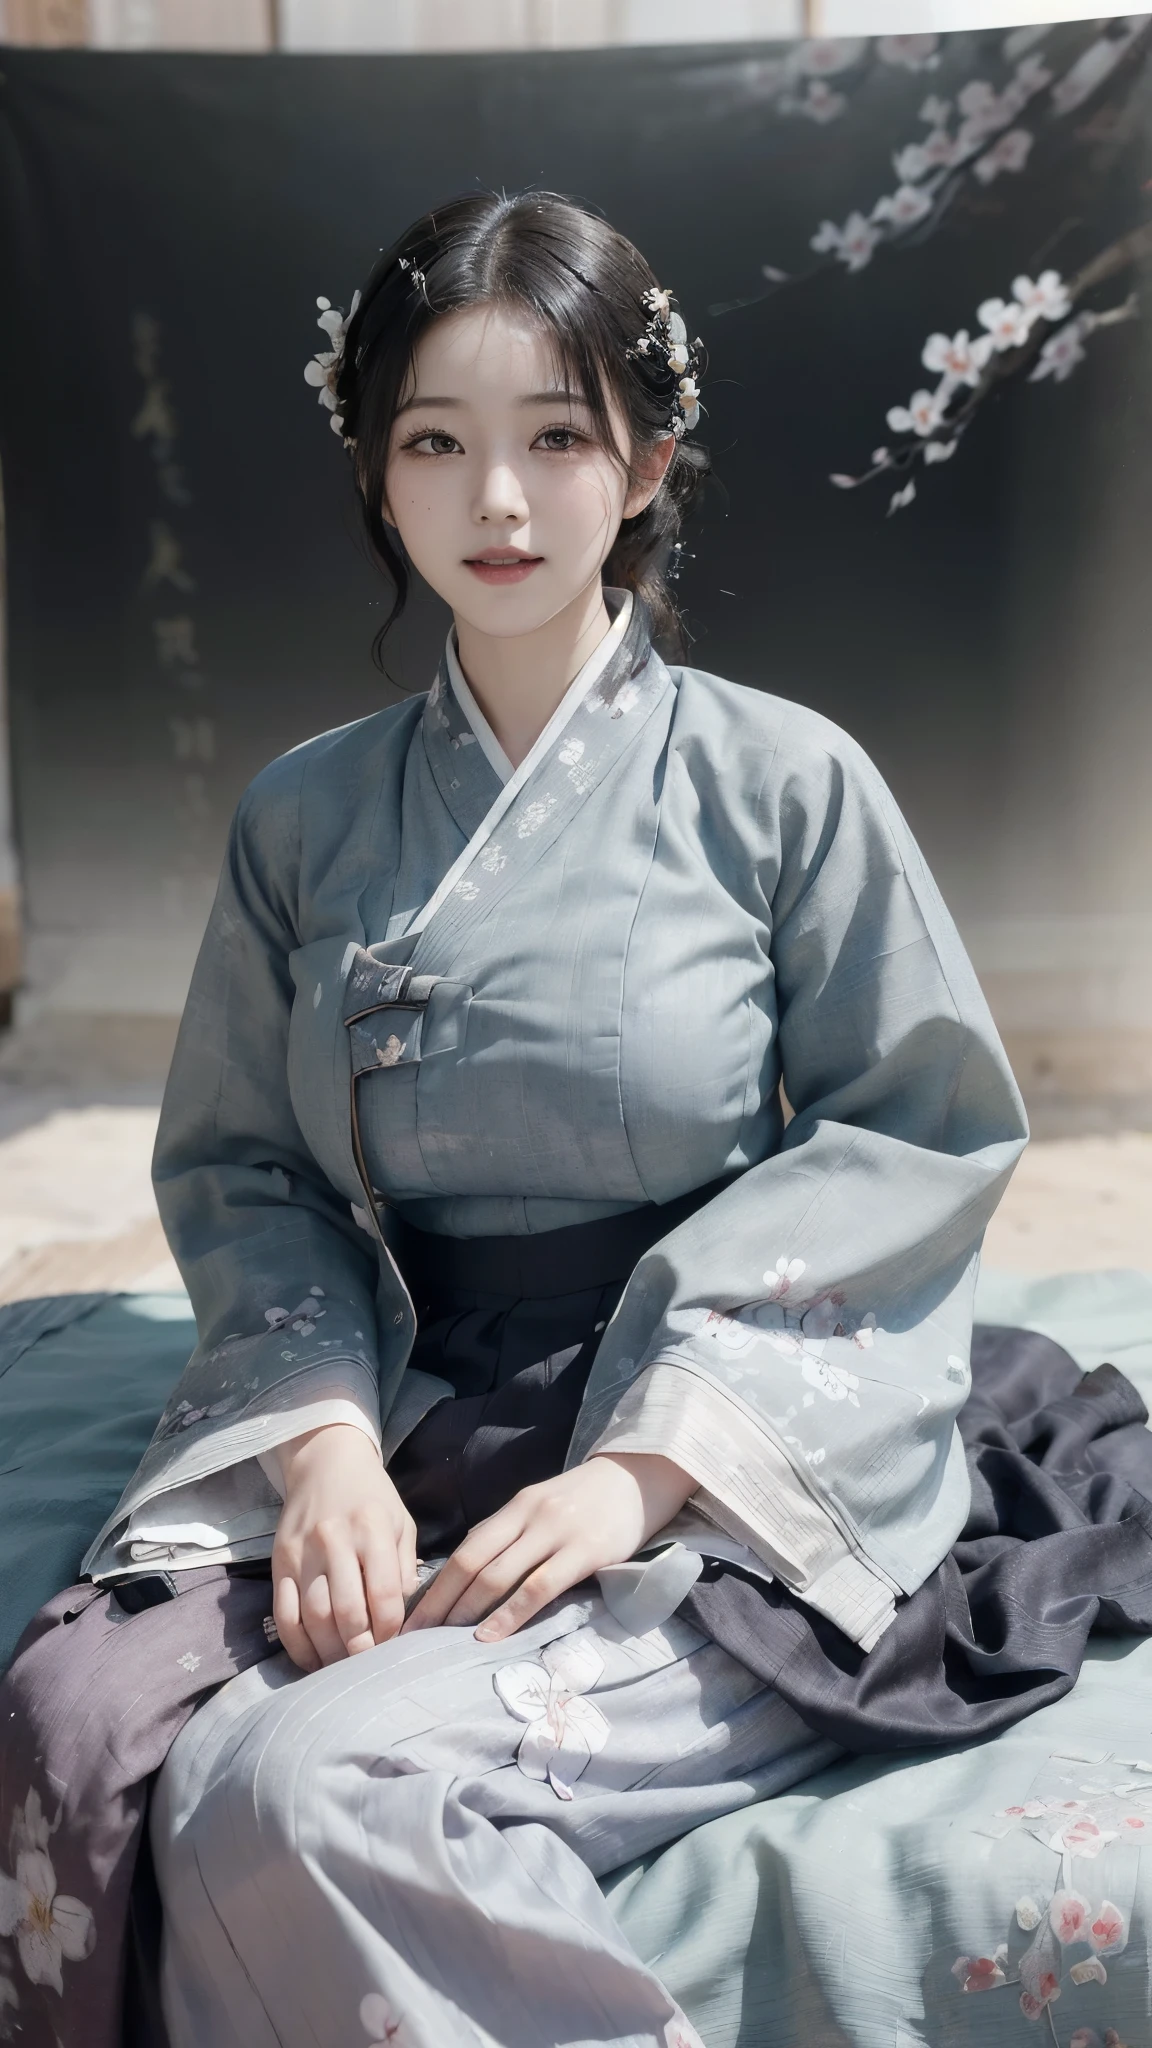 (best quality, 8K, masterpiece: 1.3), ((((((Incredibly huge breasts: 0.8))))), hairpin, (beautiful face:1.3), plum blossom ink painting background,authentic hanbok, 1920s photo studio, (Feels like a faded photo: 1.4), old photos, smile, black and white photography, 1920s Hanbok style and hairstyle, retro style